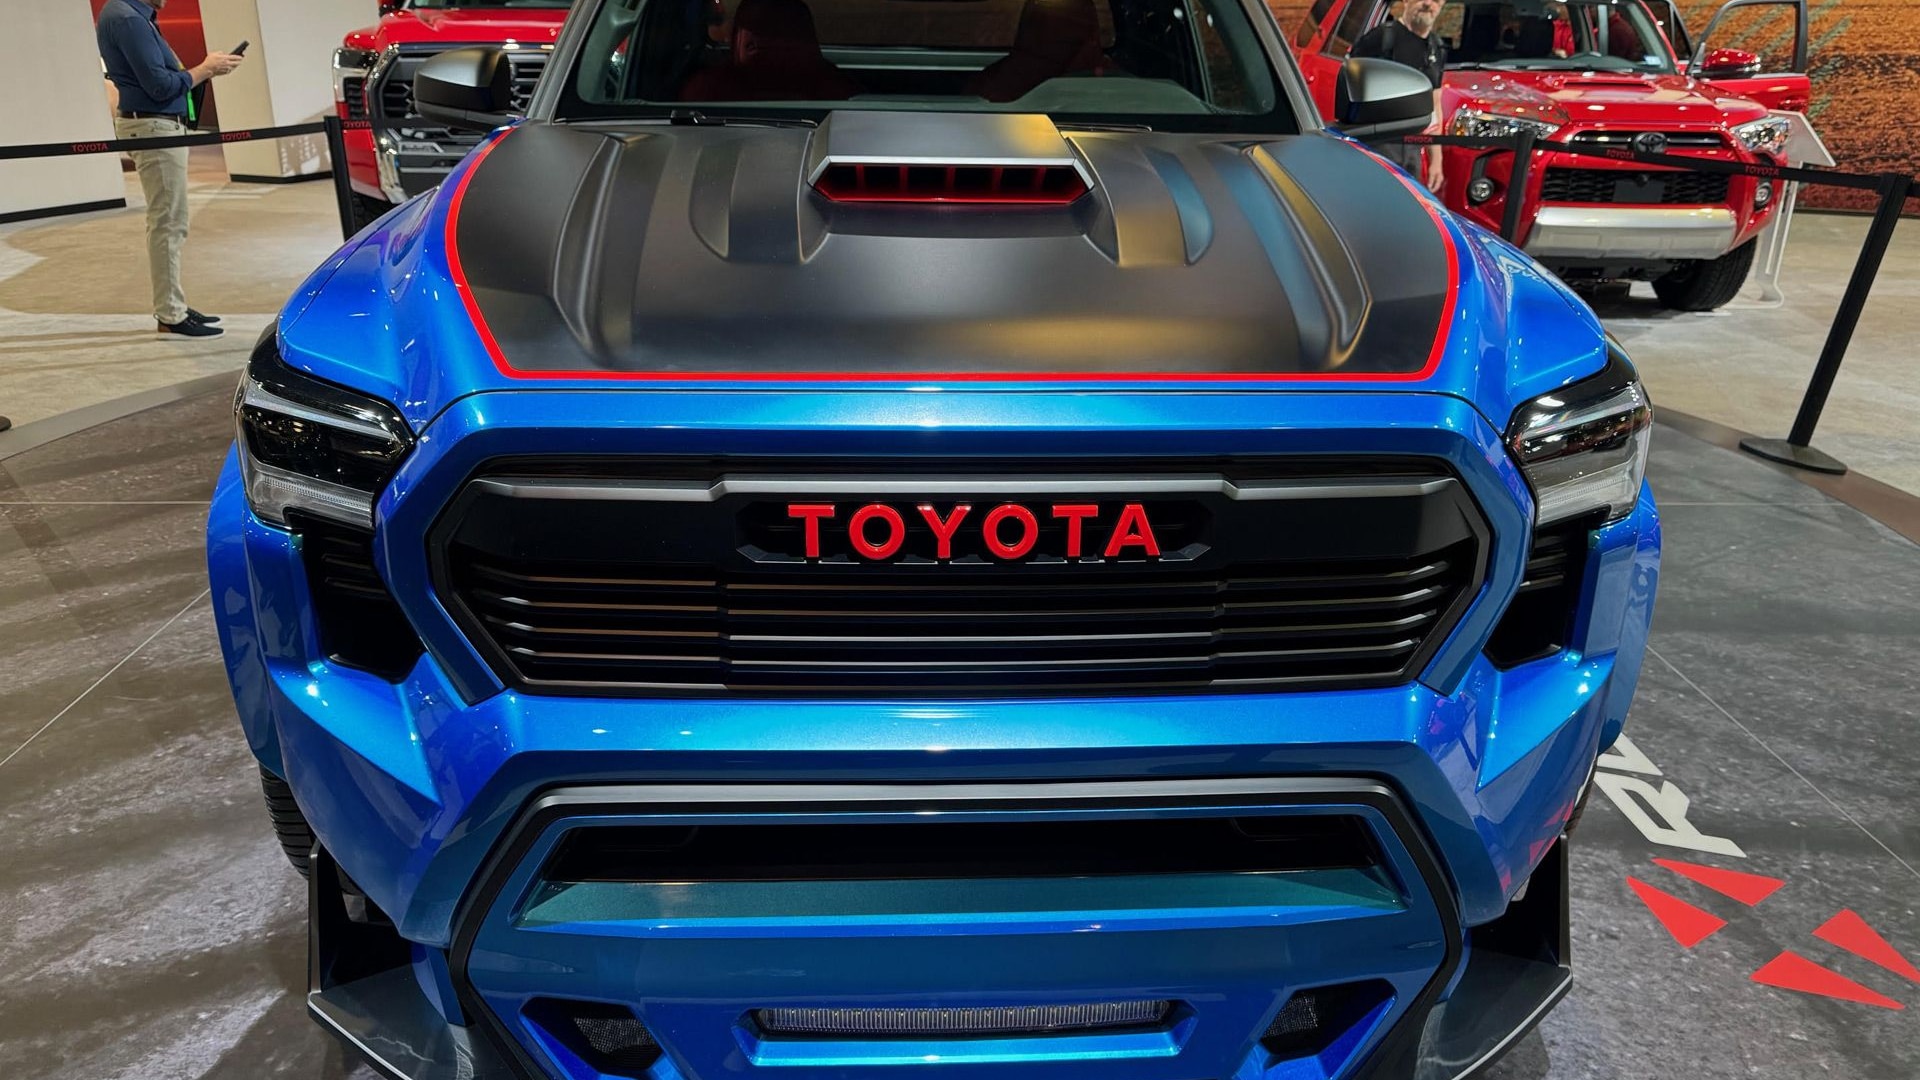 Toyota Tacoma X-Runner concept